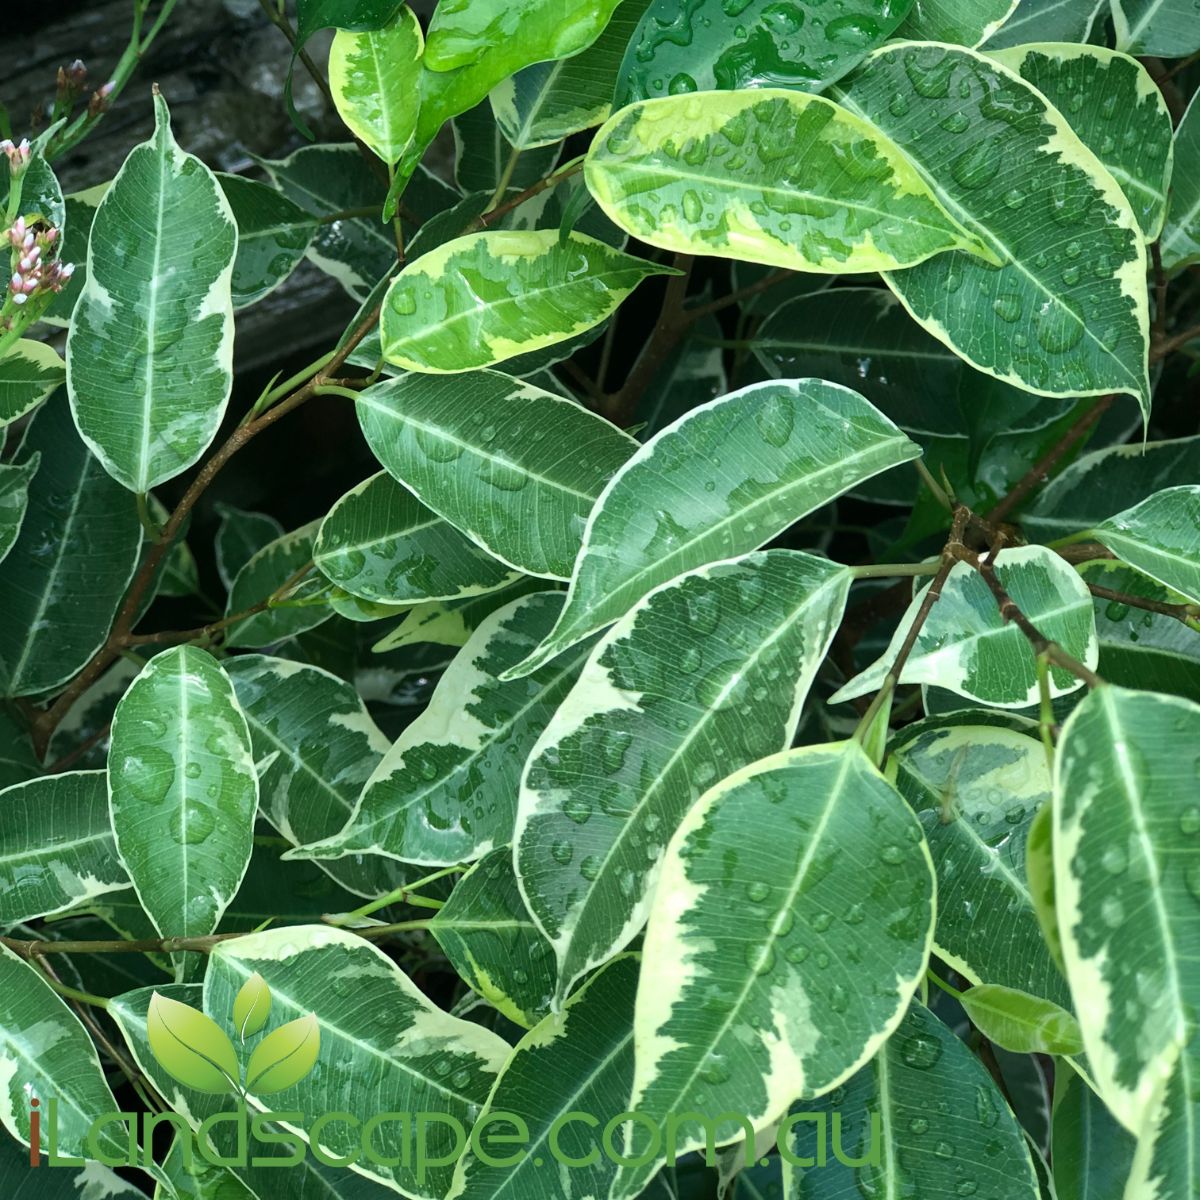 Ficus benjamina variegata weeping fig is an extremely popular house plant. can be used in Bonsais or even just a nice feature house plant. does not require much watering